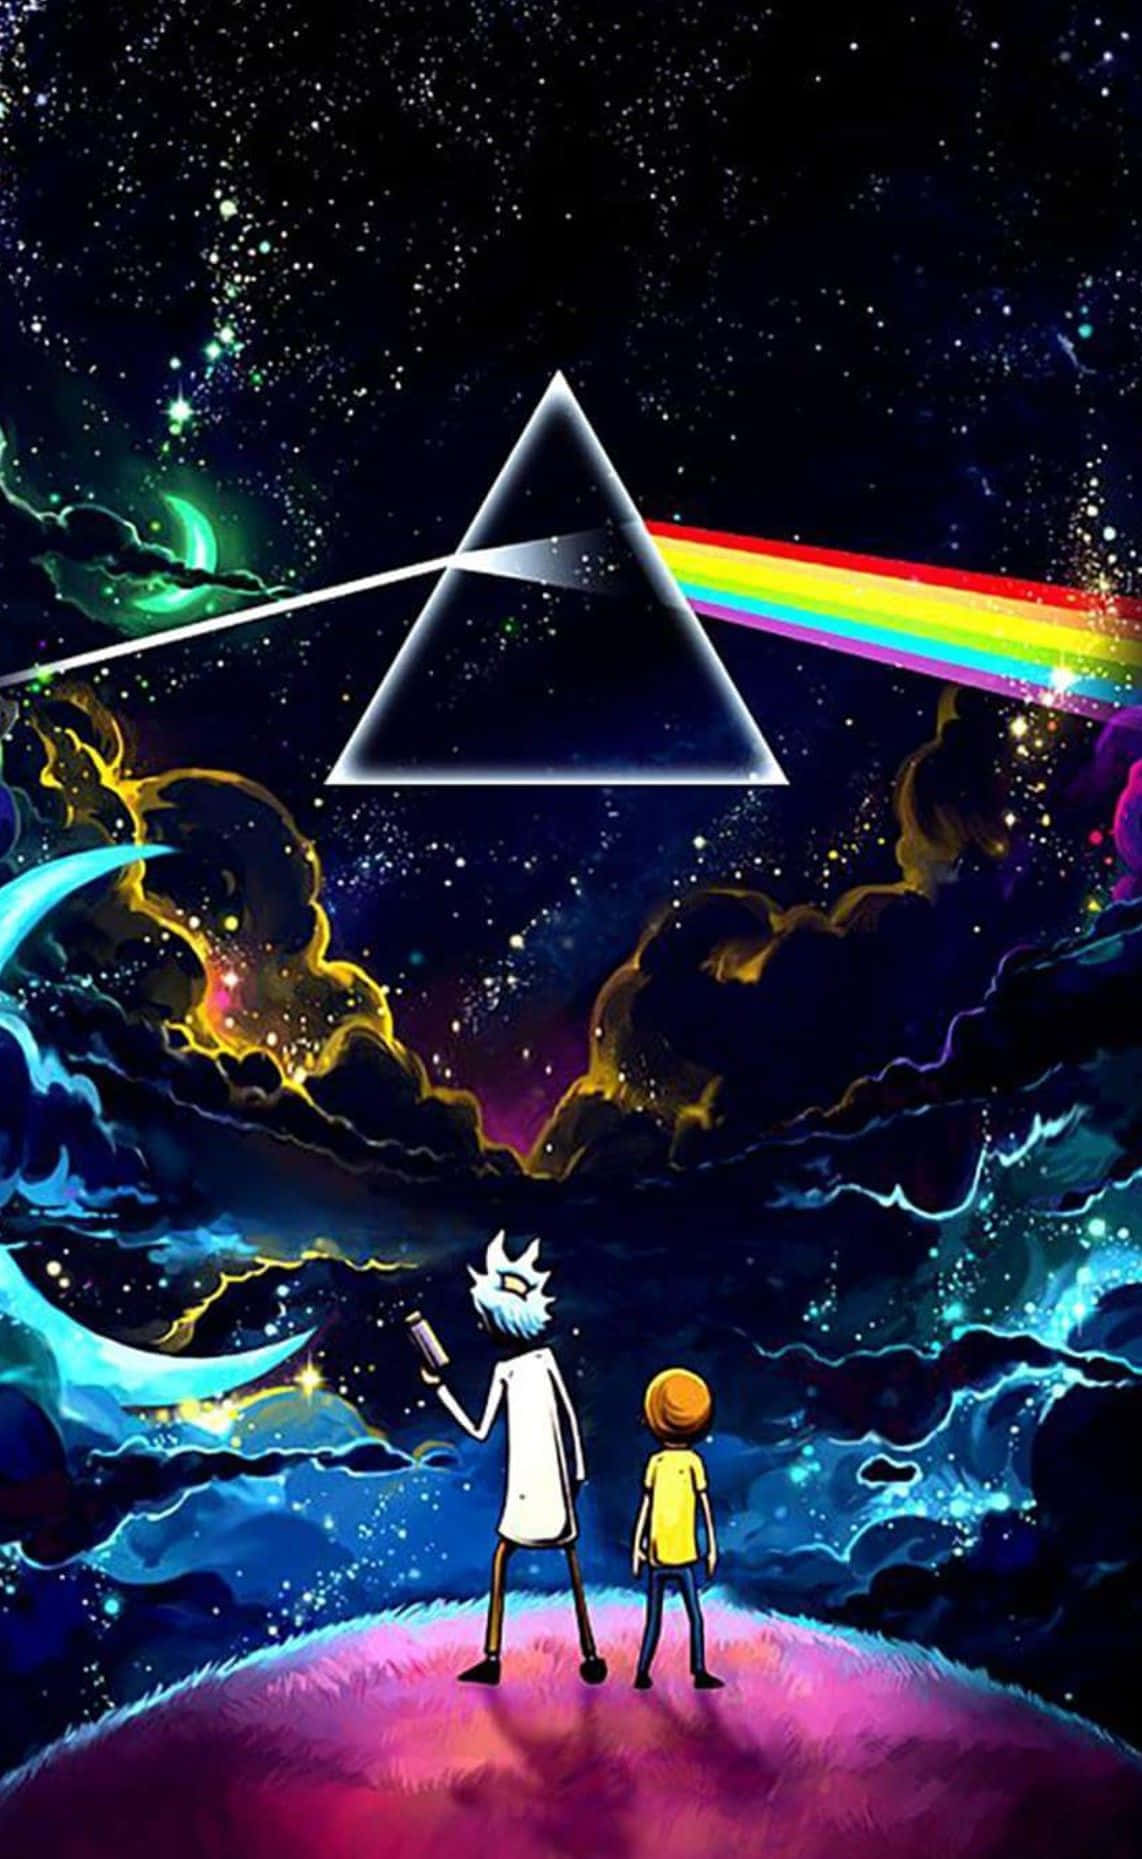 A Dark Side Of The Moon With Two People Standing In Front Of It